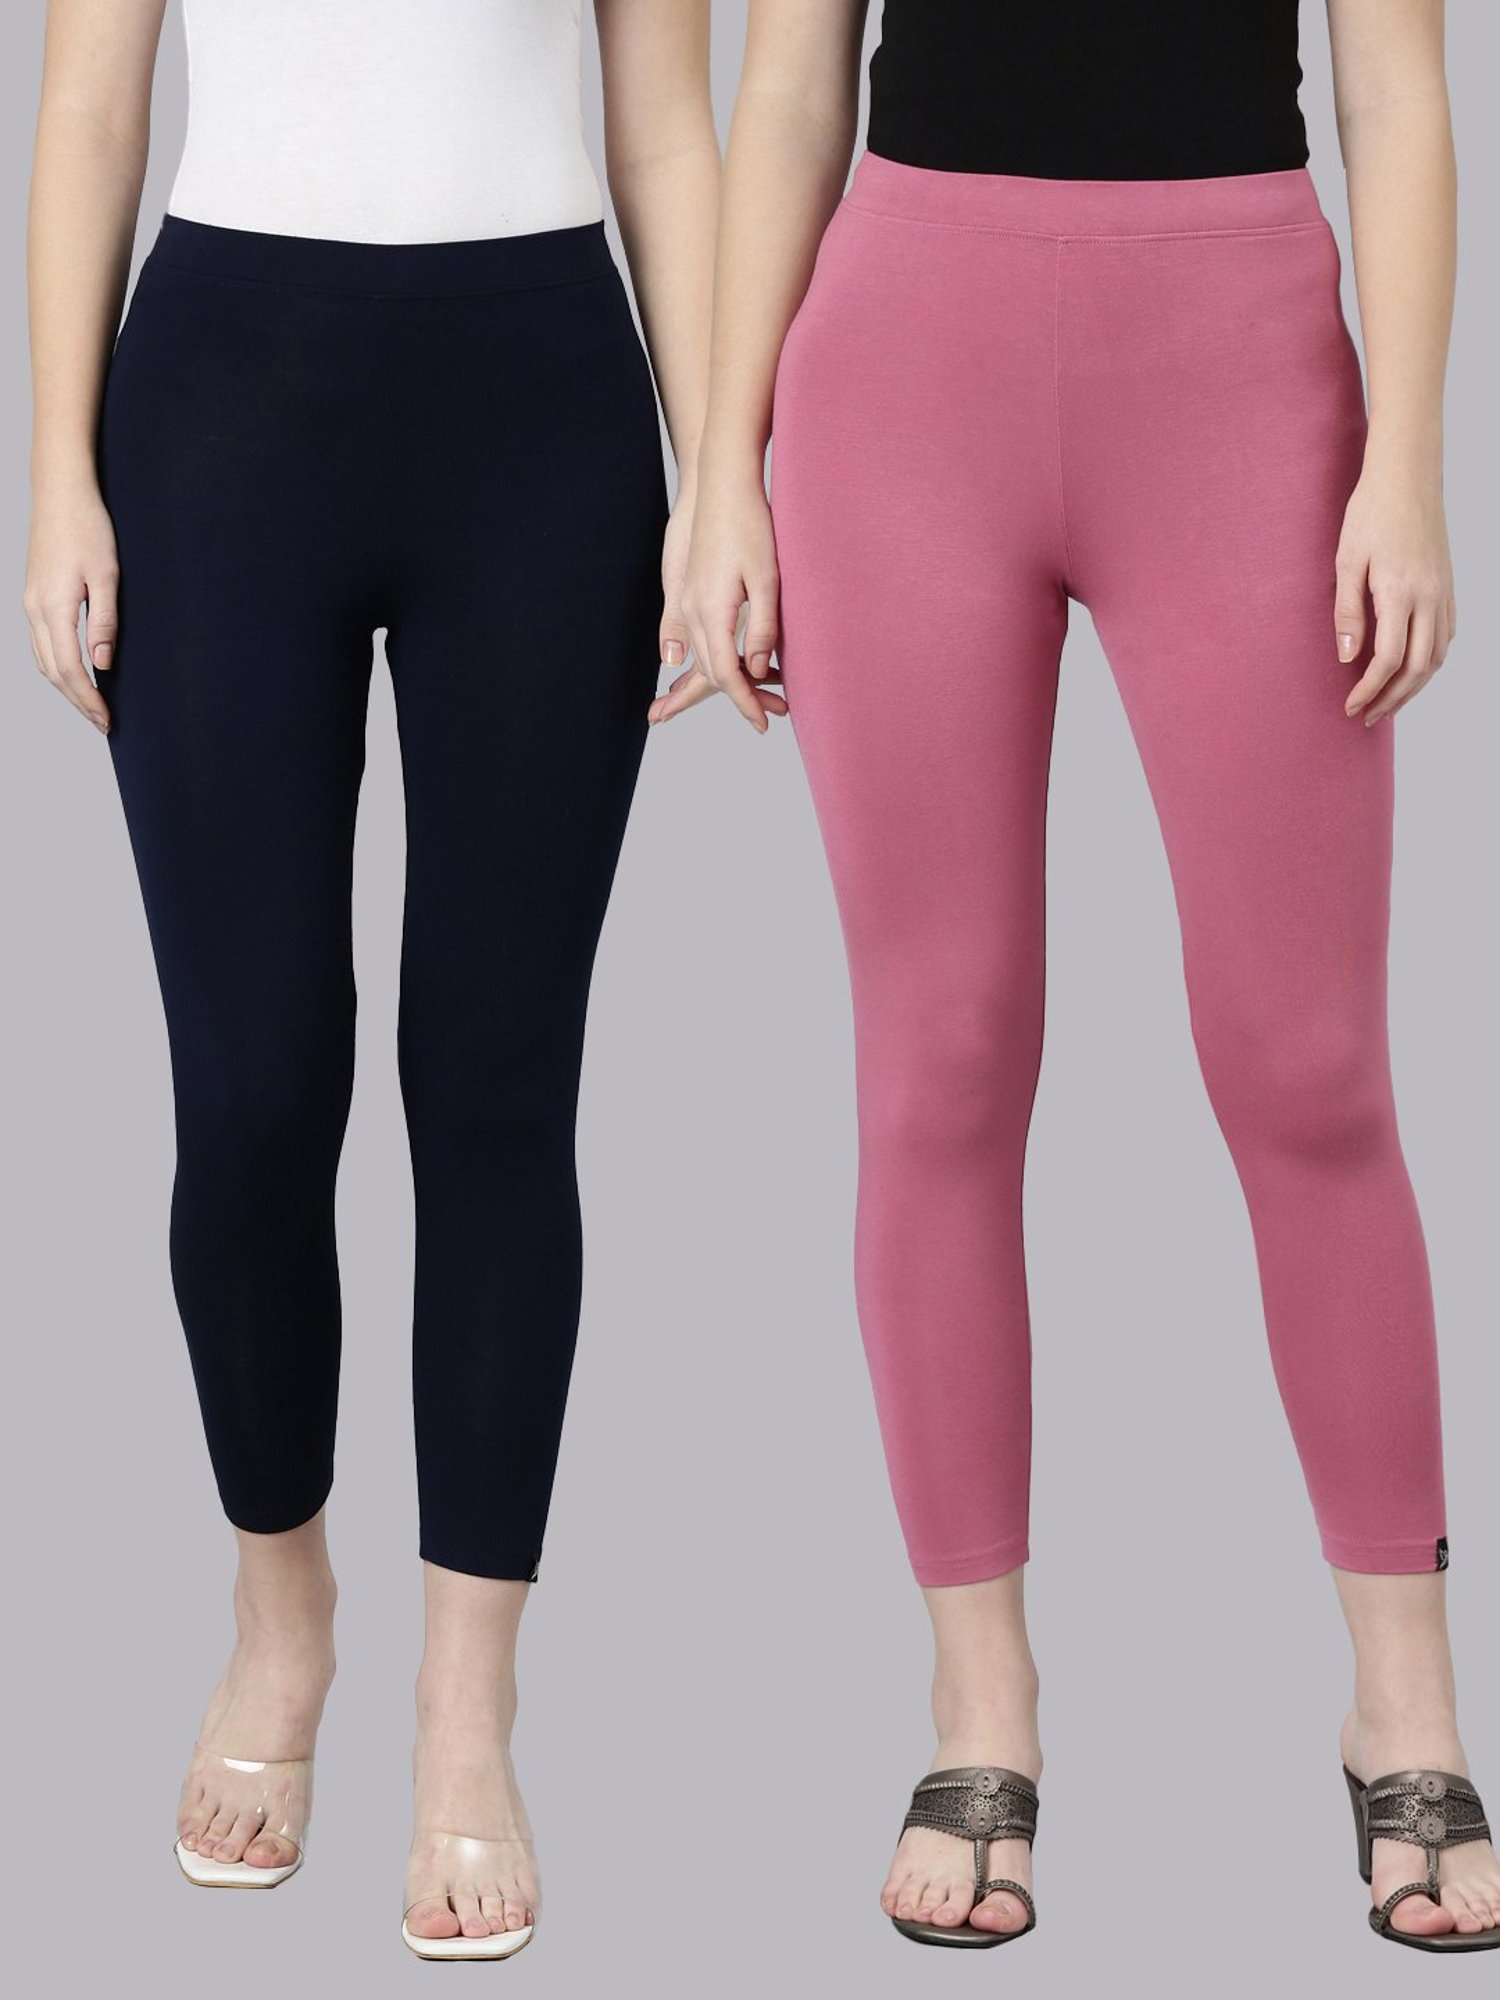 TWIN BIRDS Navy & Pink Plain Cropped Leggings - Pack Of 2